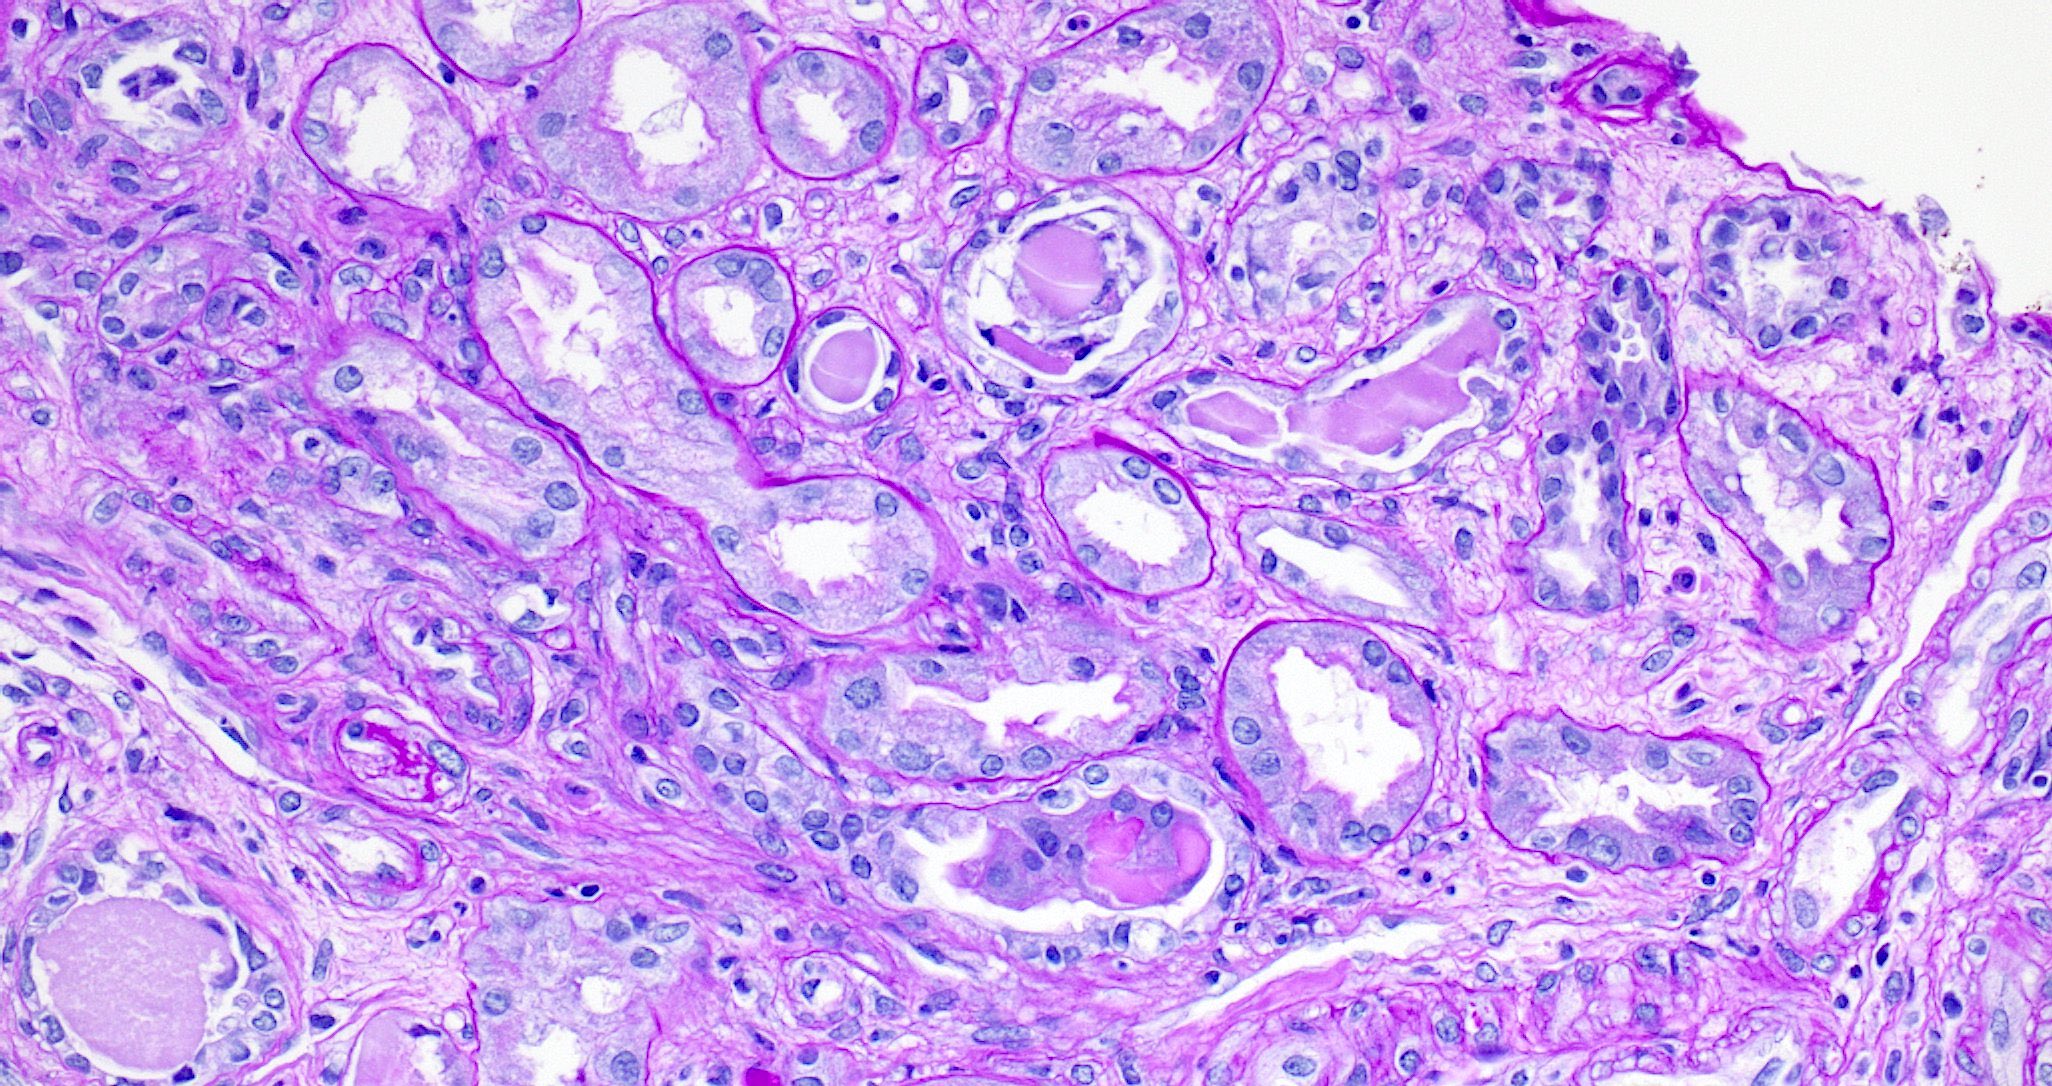 Pale casts with giant cell reaction